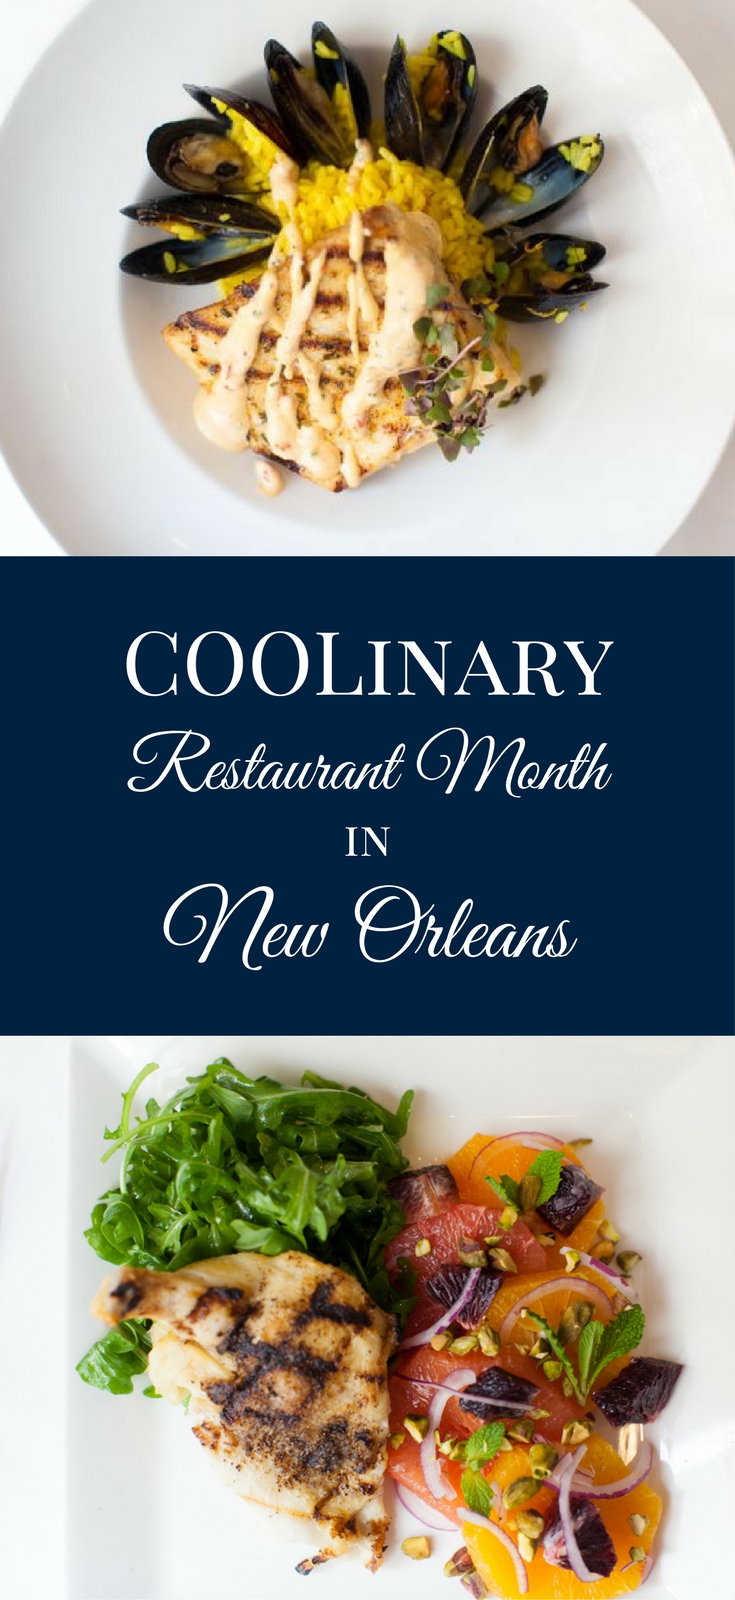 New Orleans offers the ultimate summer dining experience: COOLinary, happening August 1-31. Indulge and taste all that New Orleans has to offer, for less!